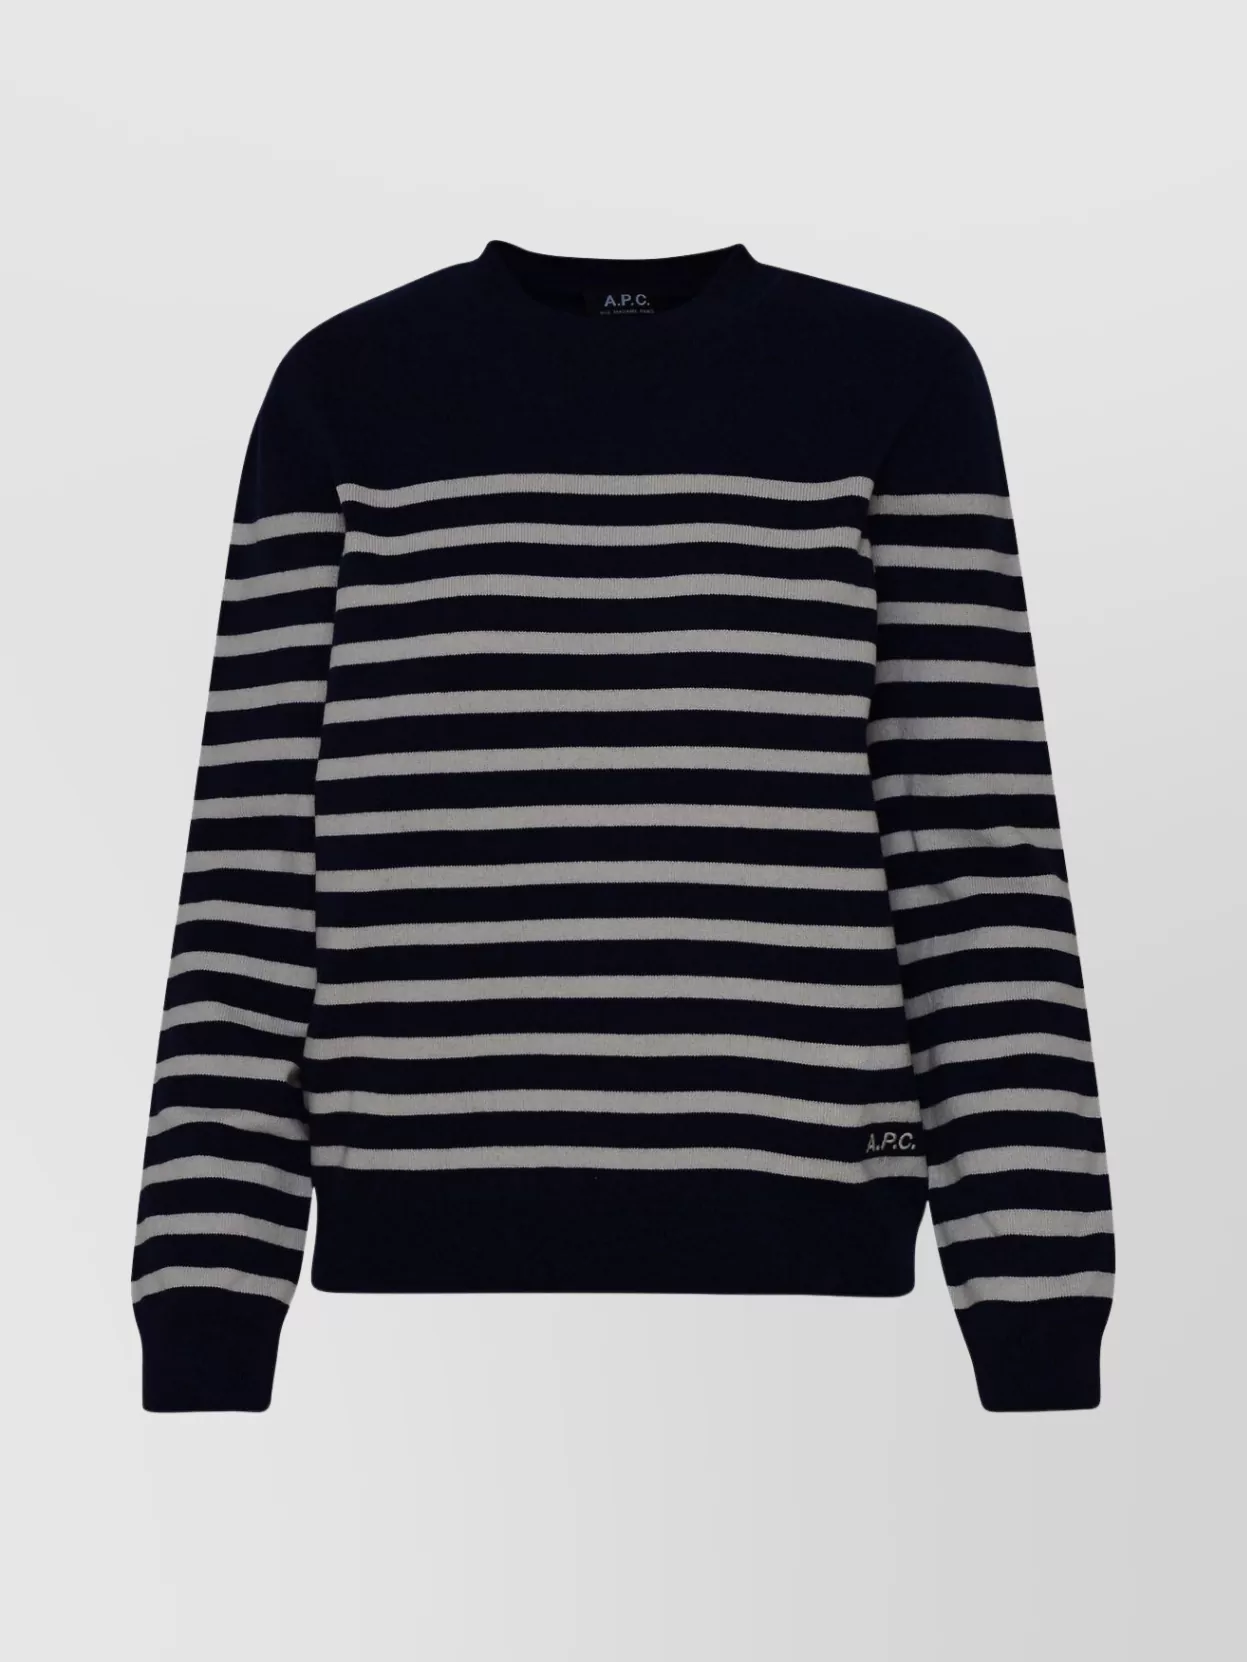 Apc Cashmere Blend Phoebe Sweater In Black